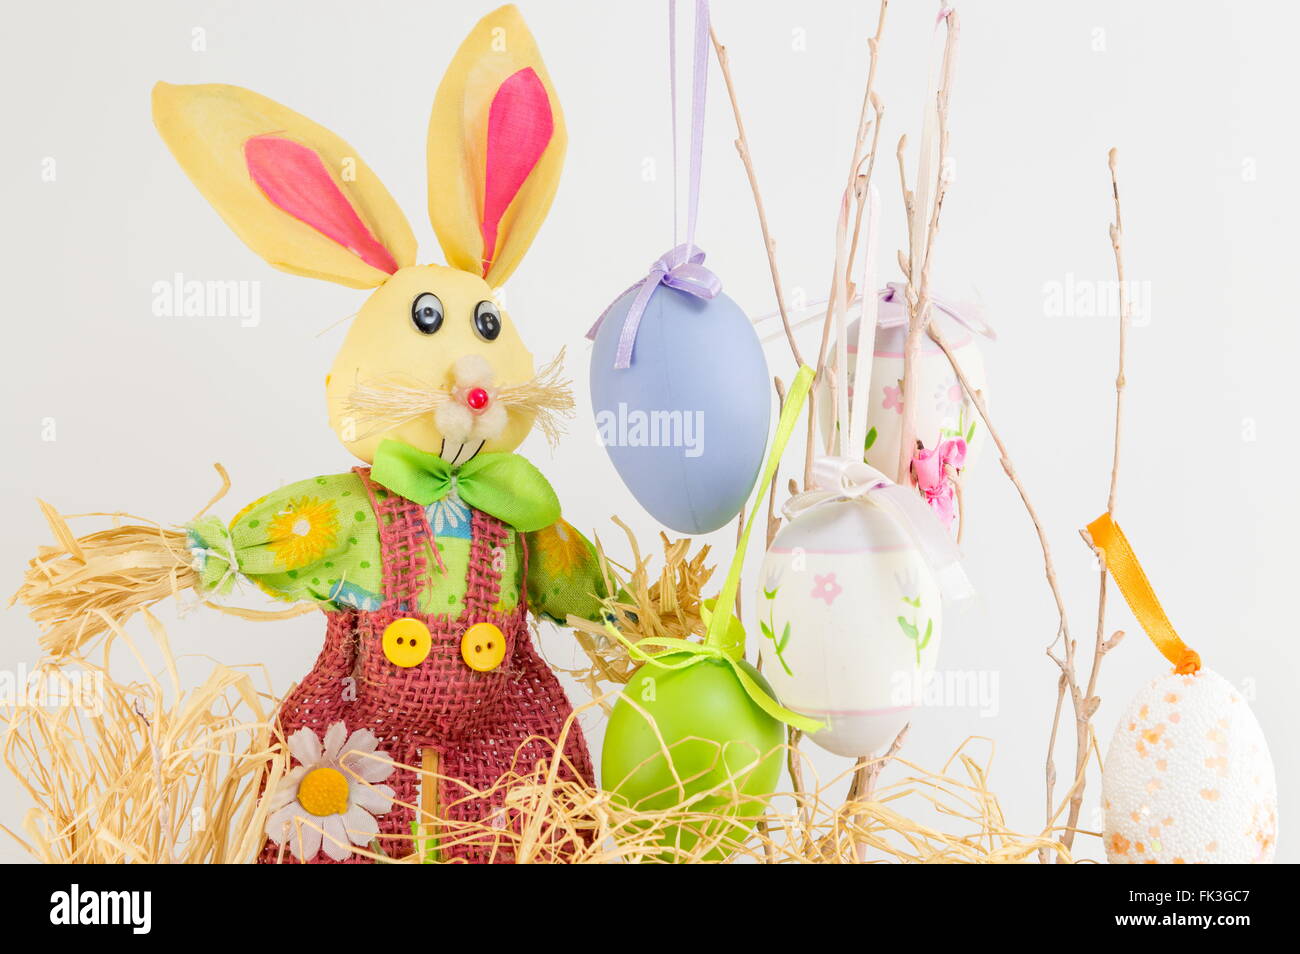 Easter bunny toy and decorated Easter eggs Stock Photo